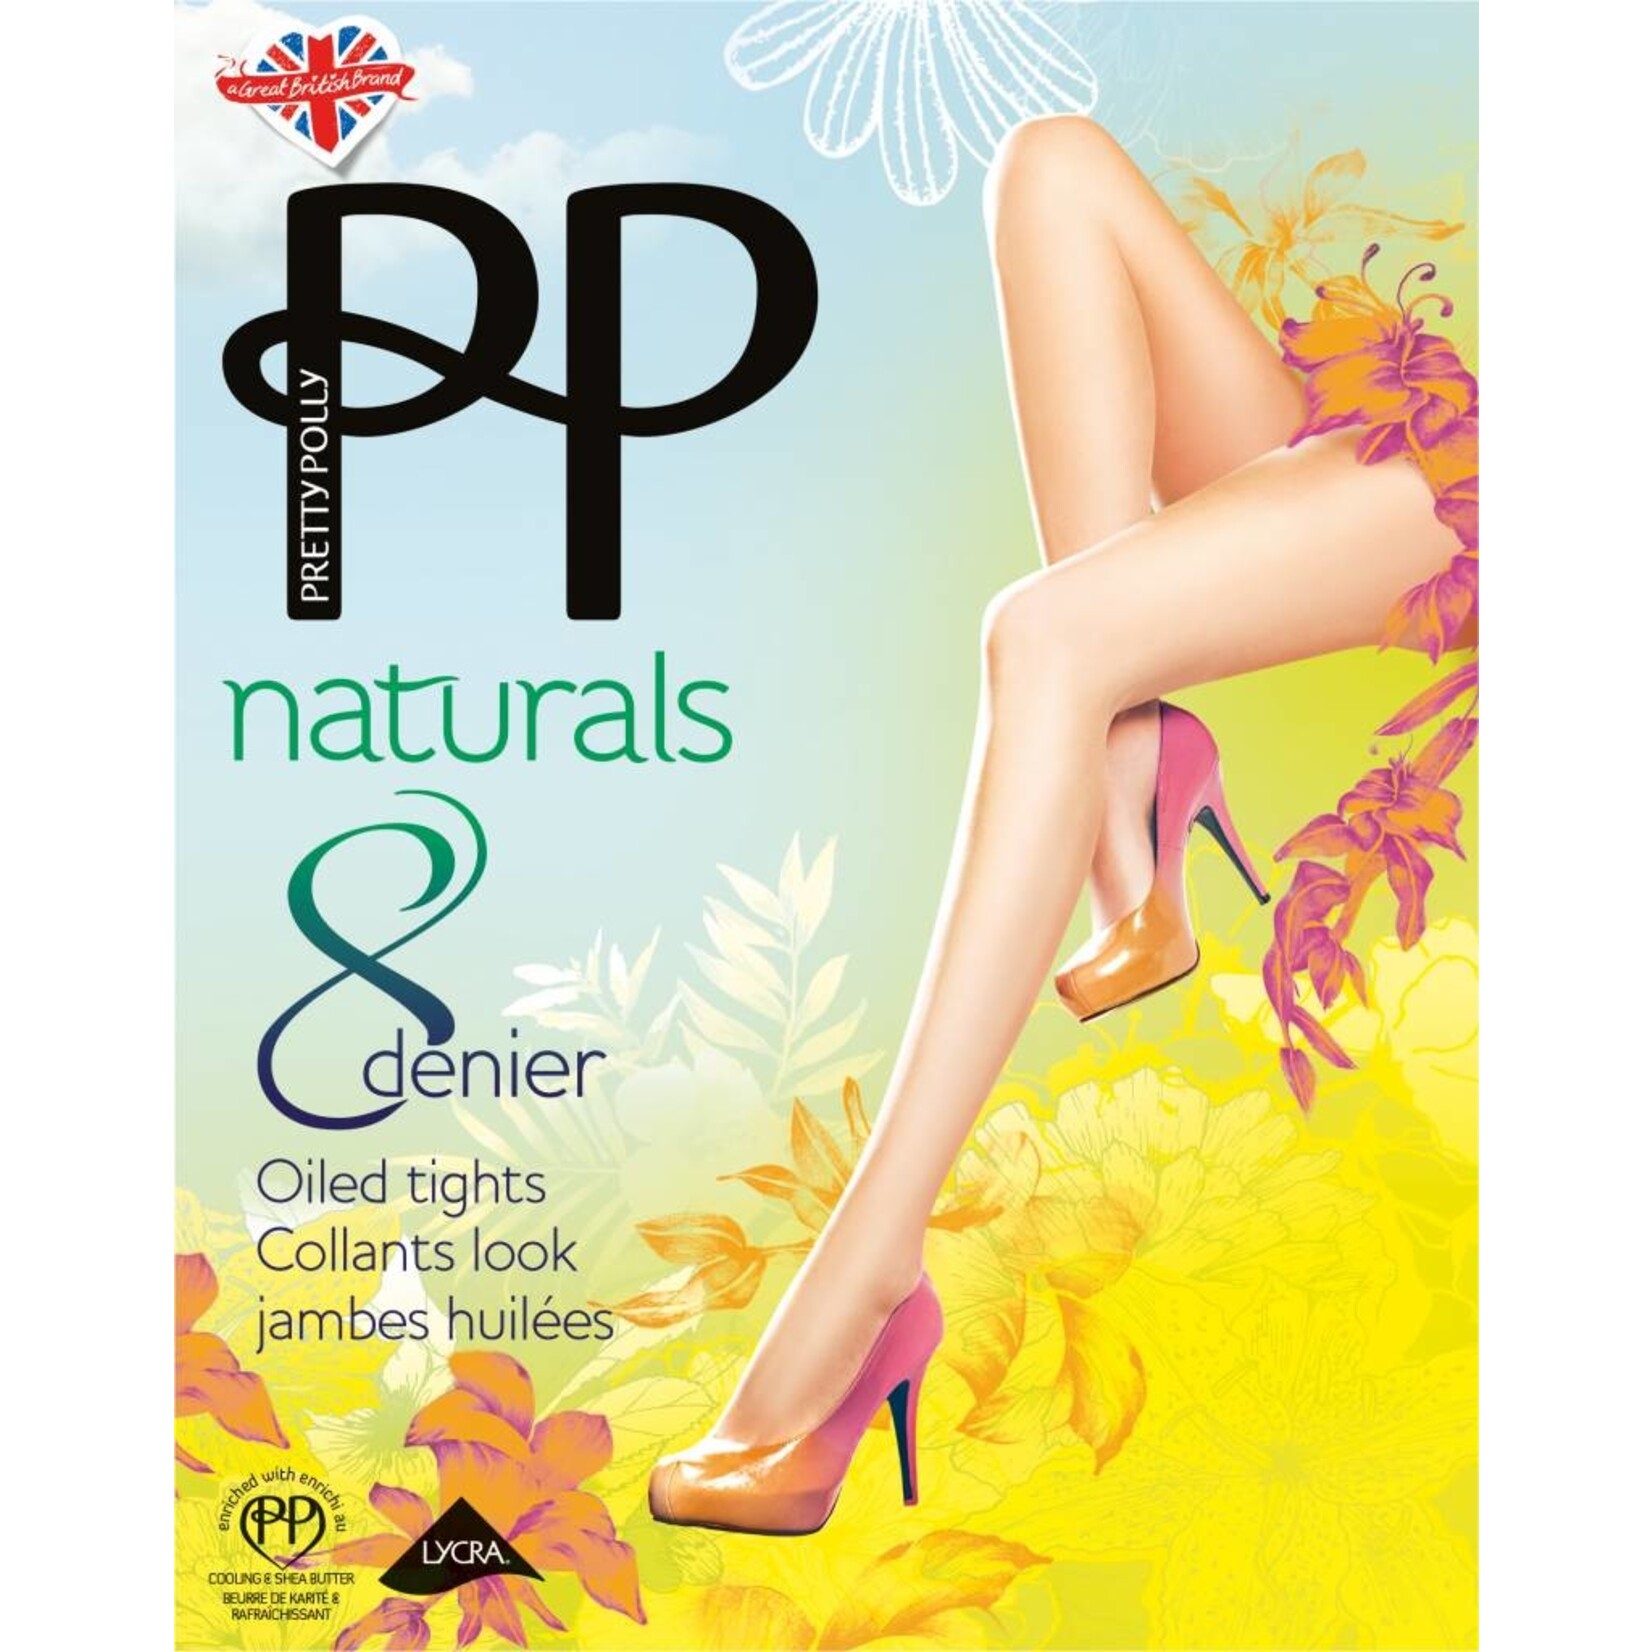 Pretty Polly  8D. "Naturals" Oiled Shine Summer Tights